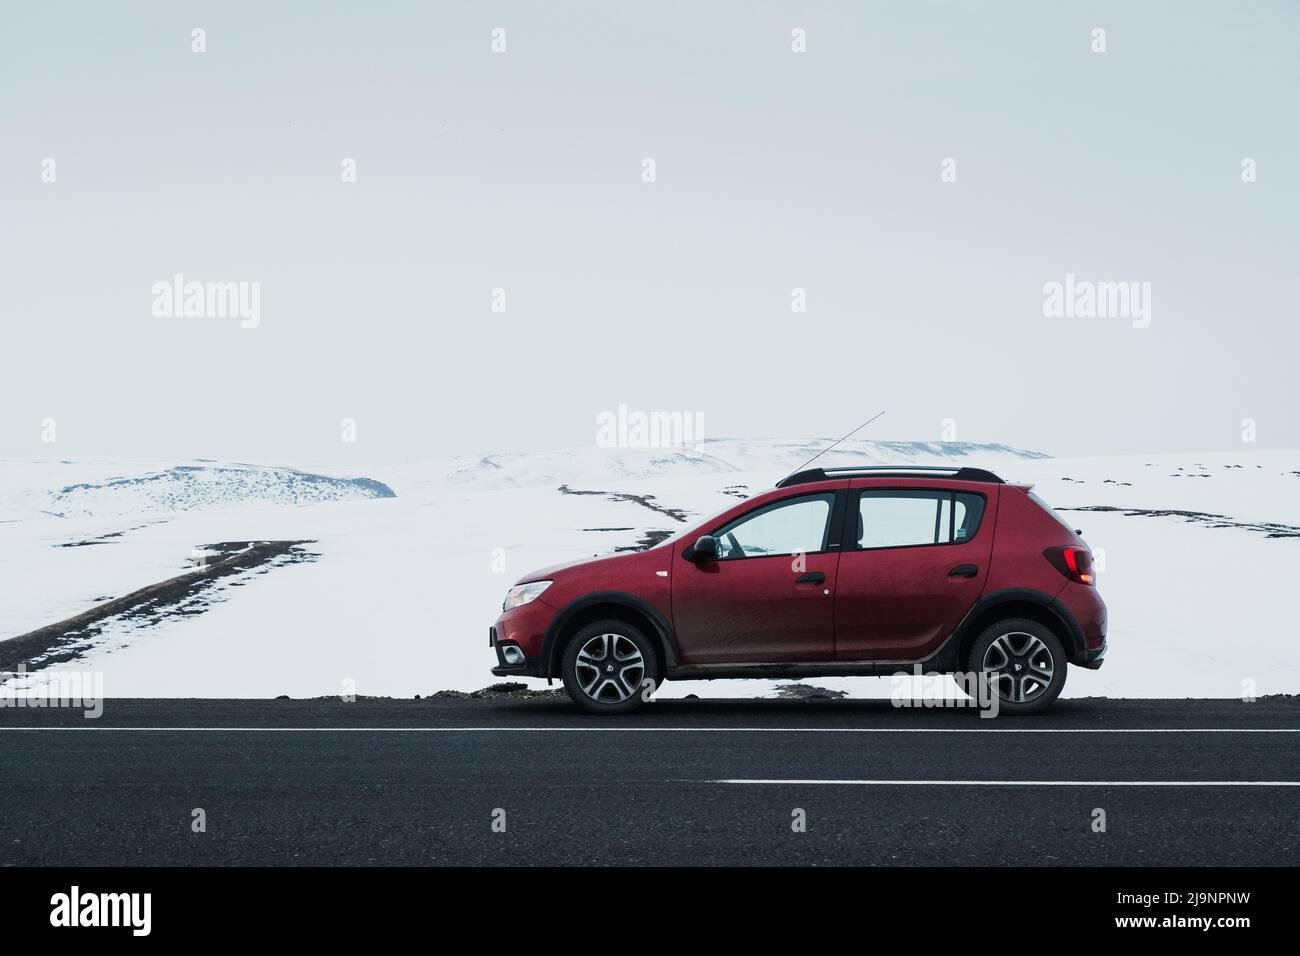 Kars, Turkey - February 25, 2022: Side view of a red colored Dacia brand Sandero model car paused on an asphalt road with a snowy background. Stock Photo